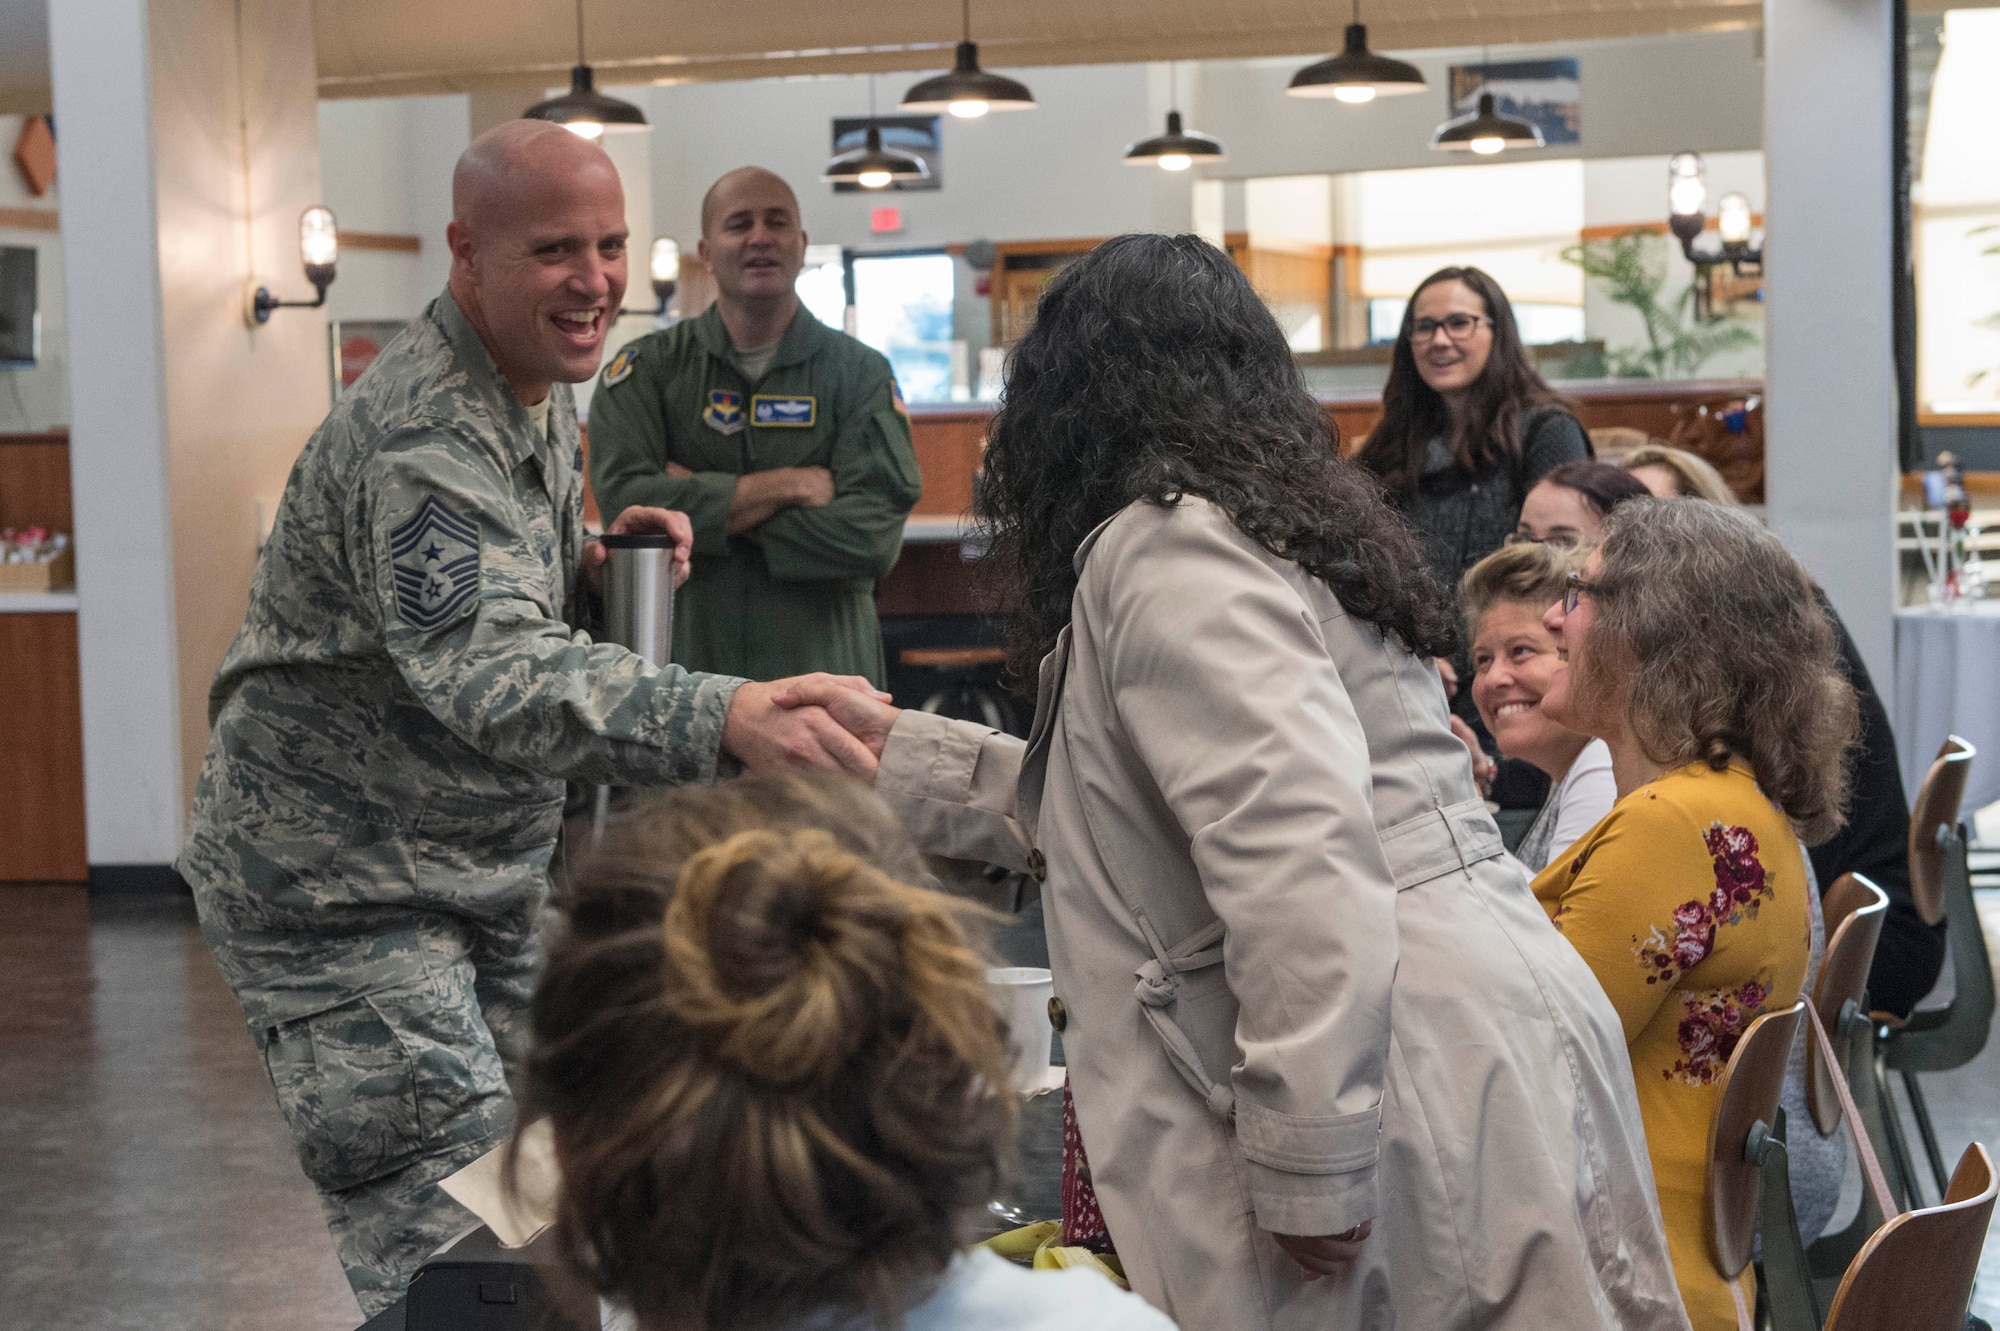 Chief Master Sgt. Randy Kay II, 97th Air Mobility Wing command chief, welcomes new military spouses during the Heartlink Spouse Orientation program.